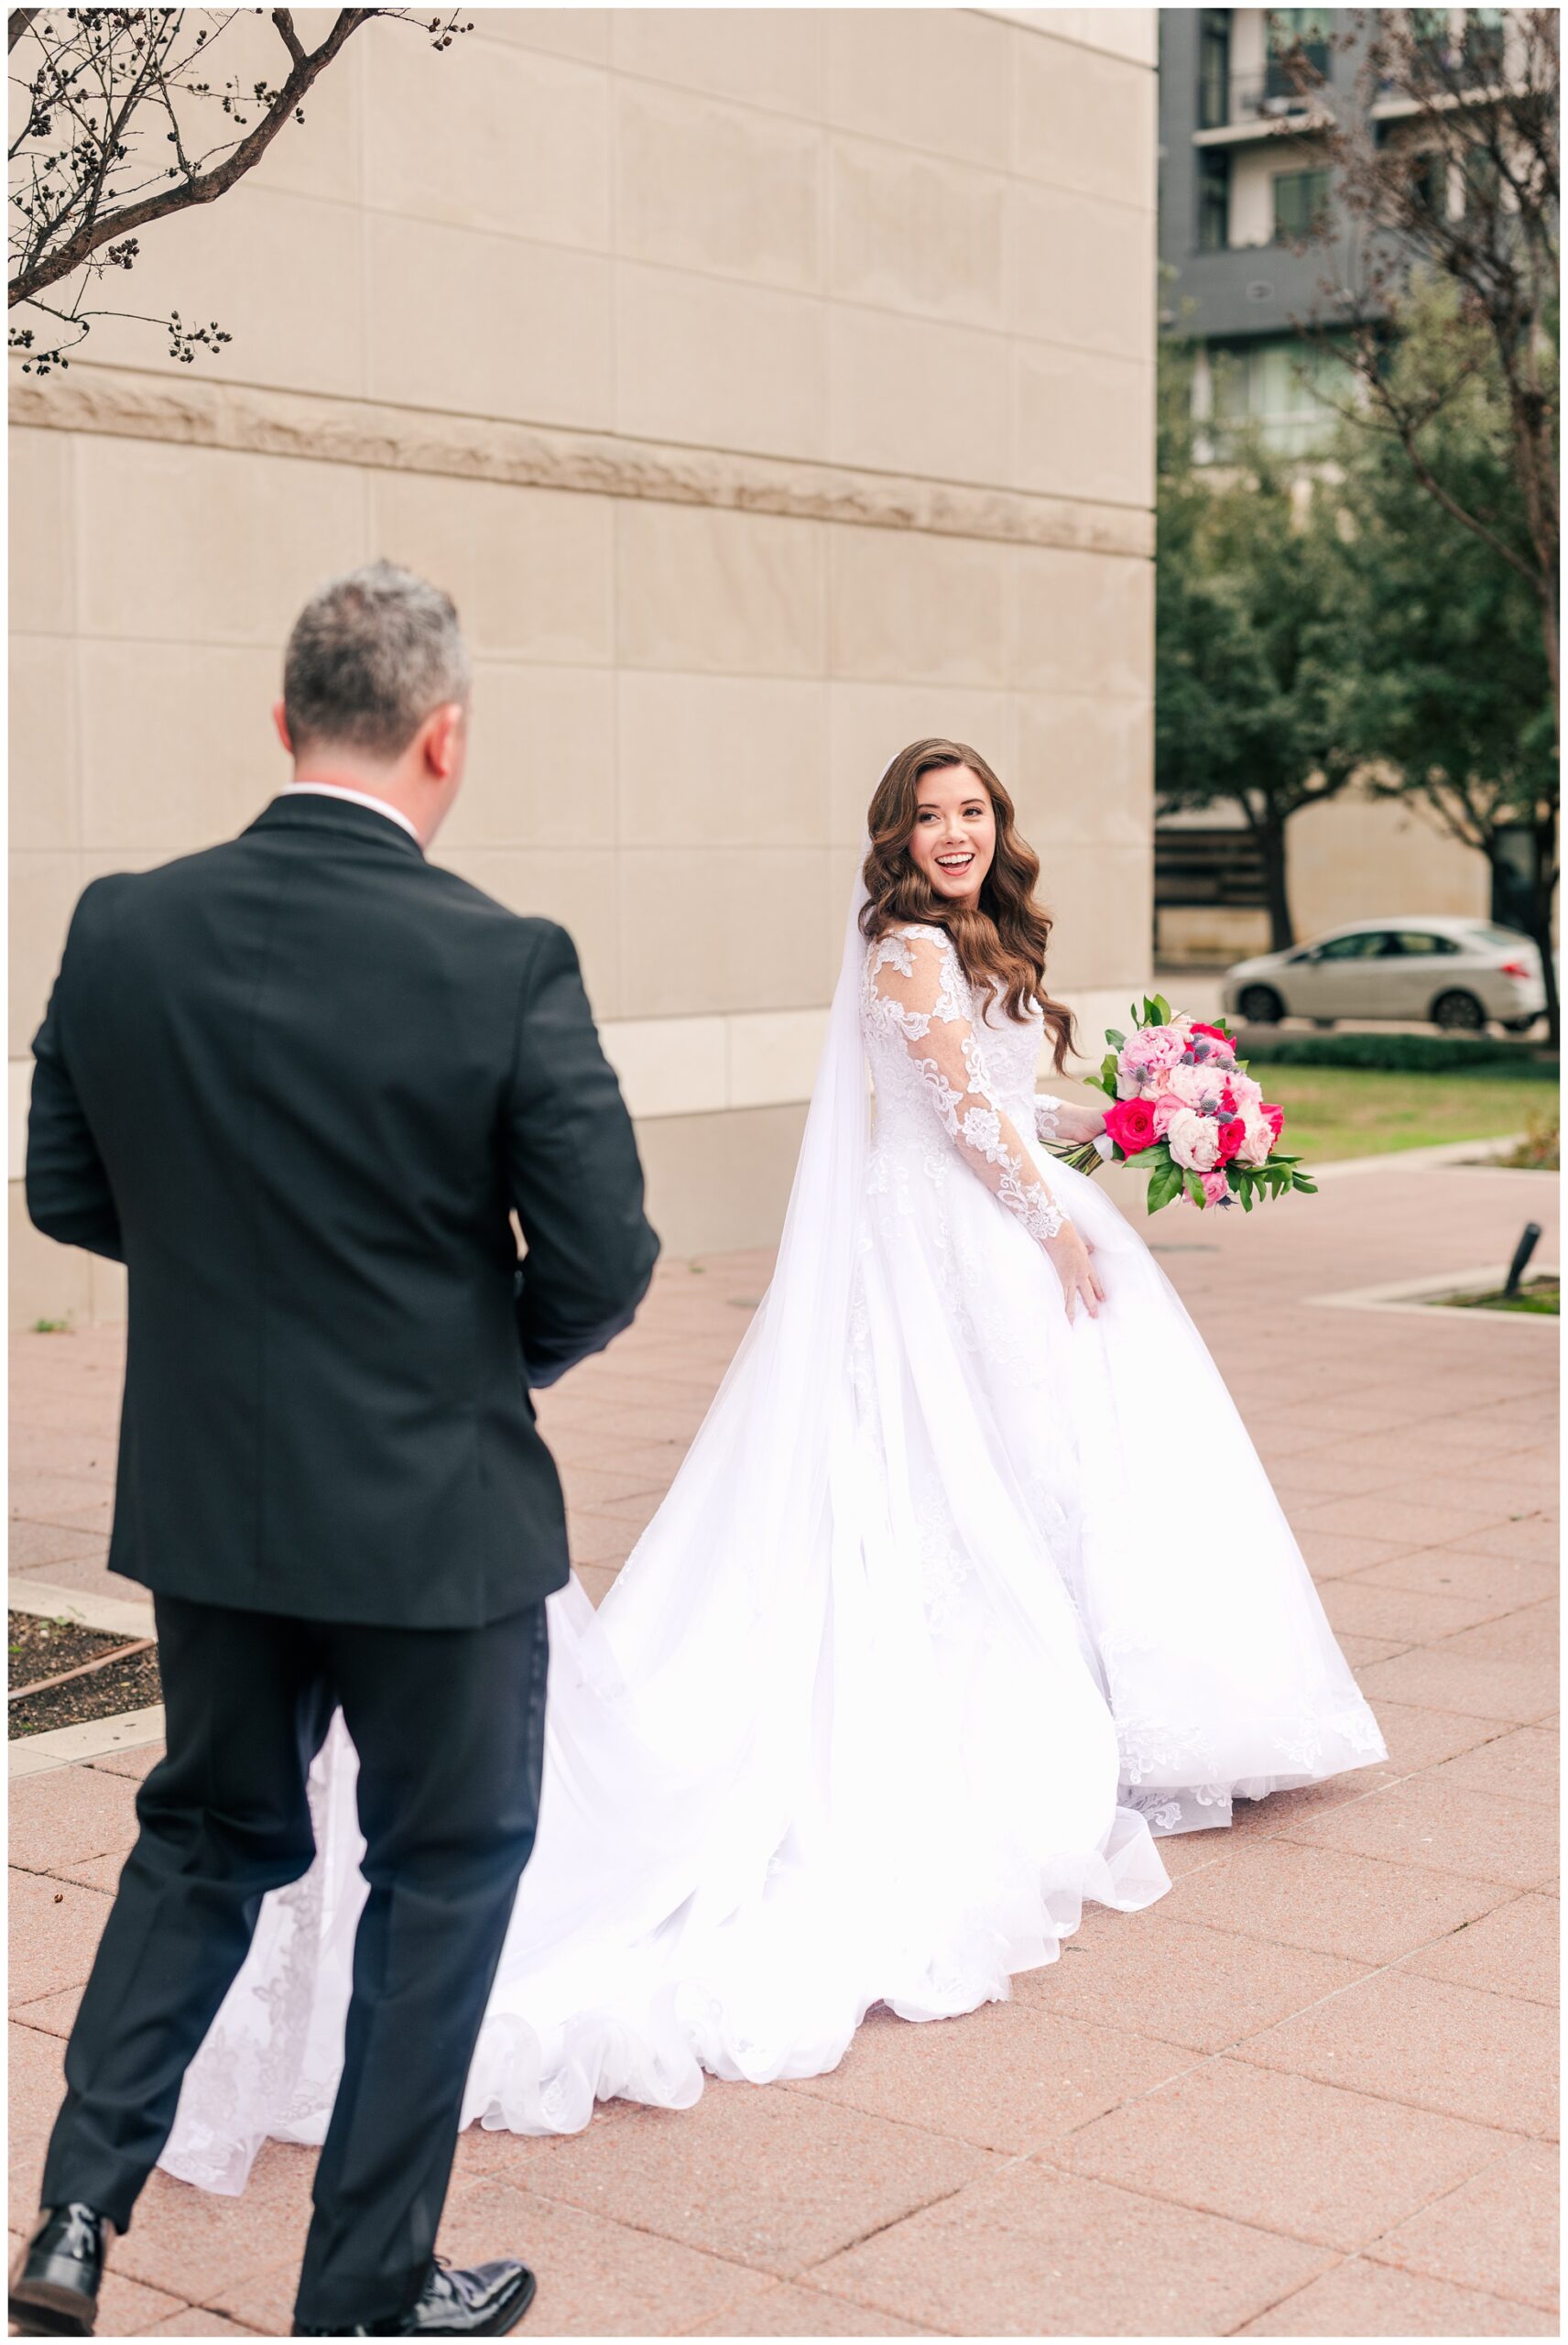 Groom helps the bride with her dress outside the Co Cathedral in Houston.